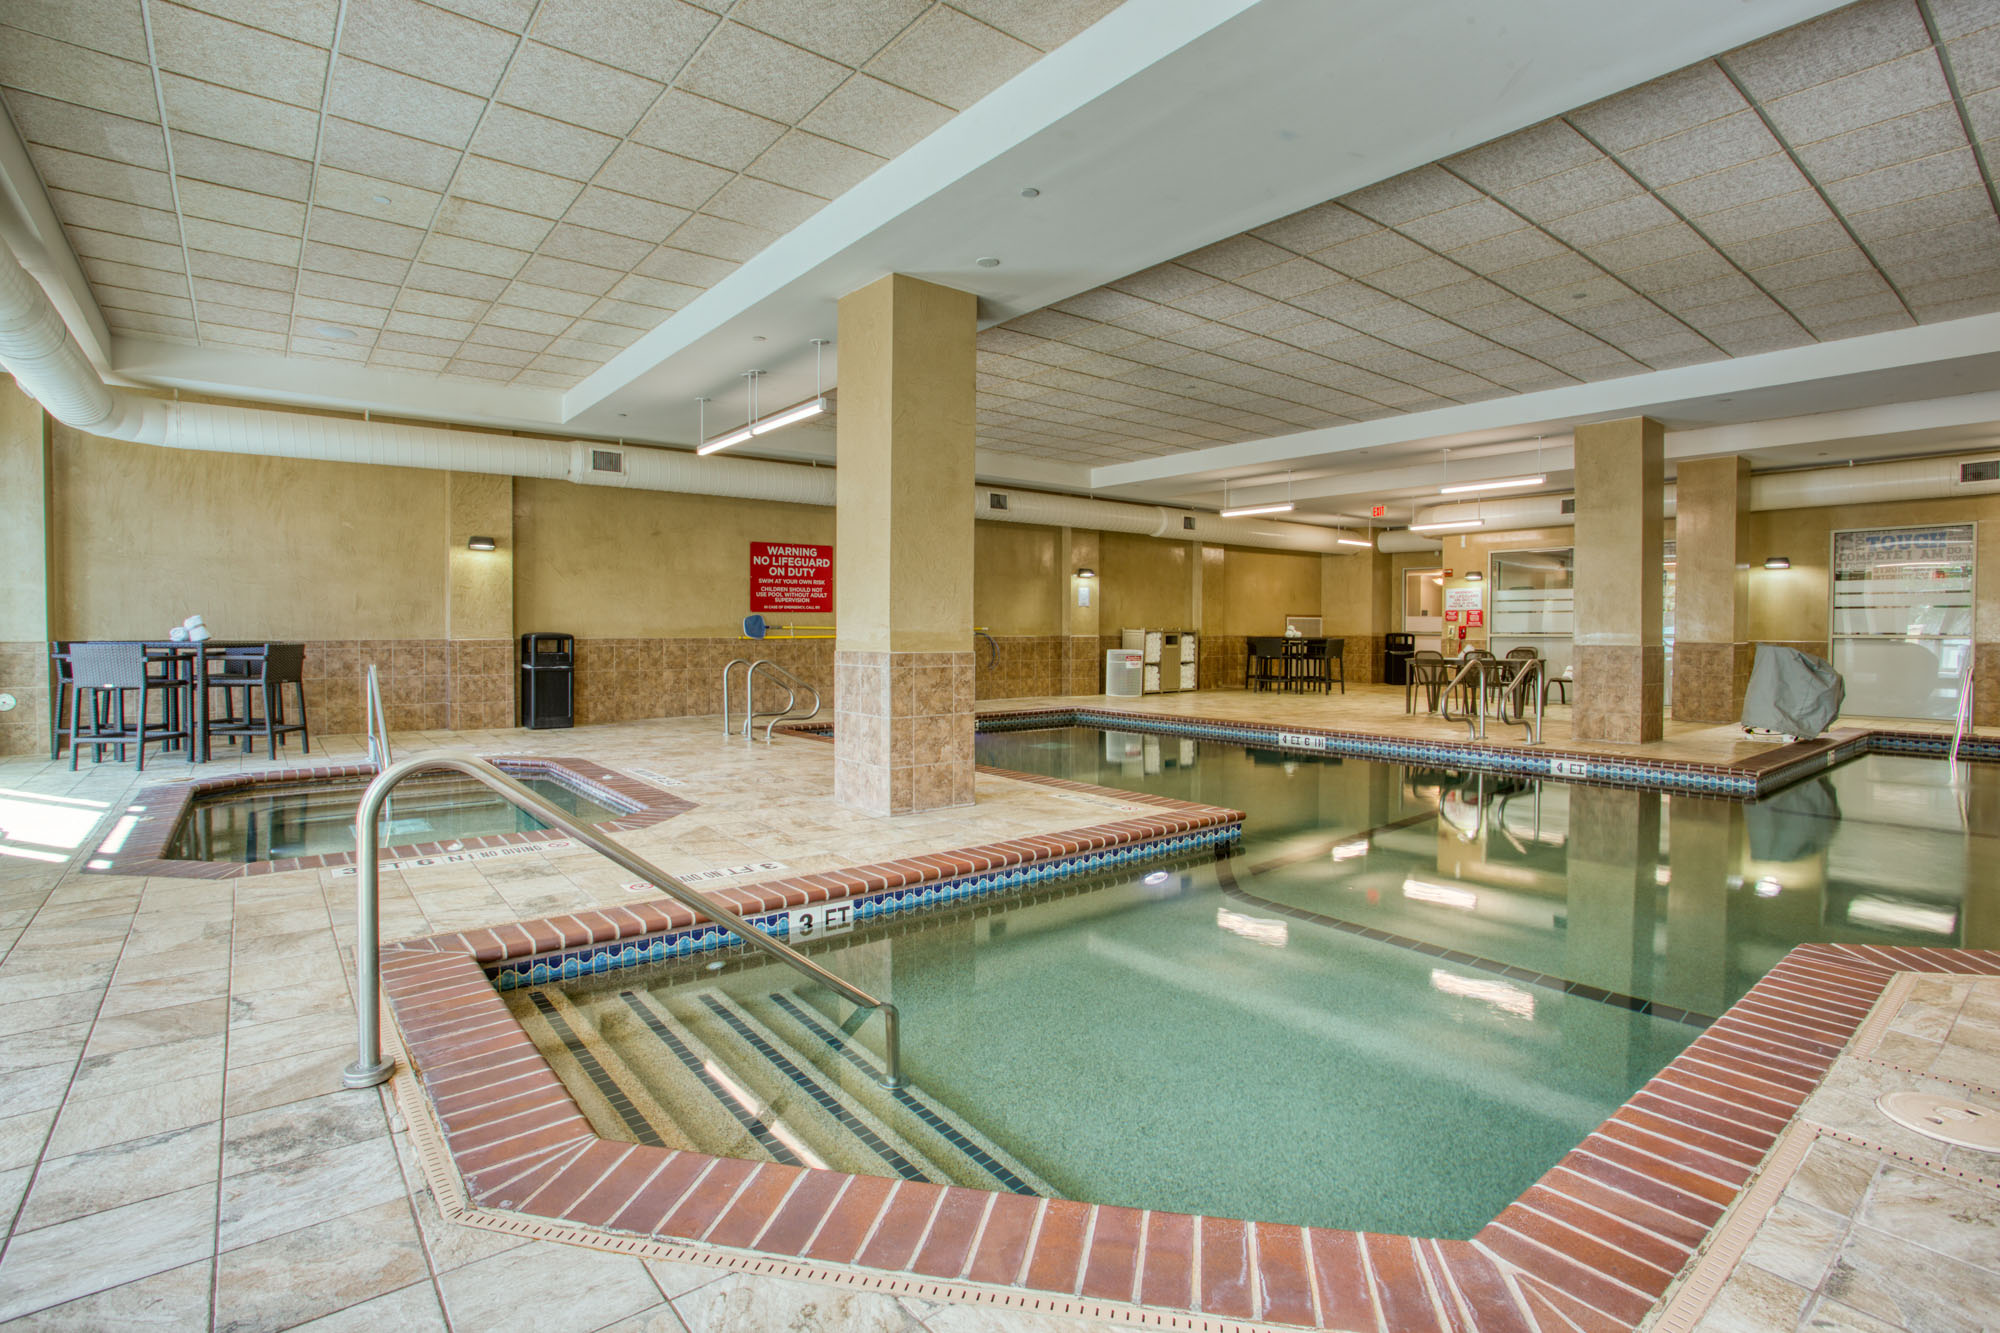 Drury Inn & Suites La Cantera- First Class San Antonio, TX Hotels- GDS  Reservation Codes: Travel Weekly